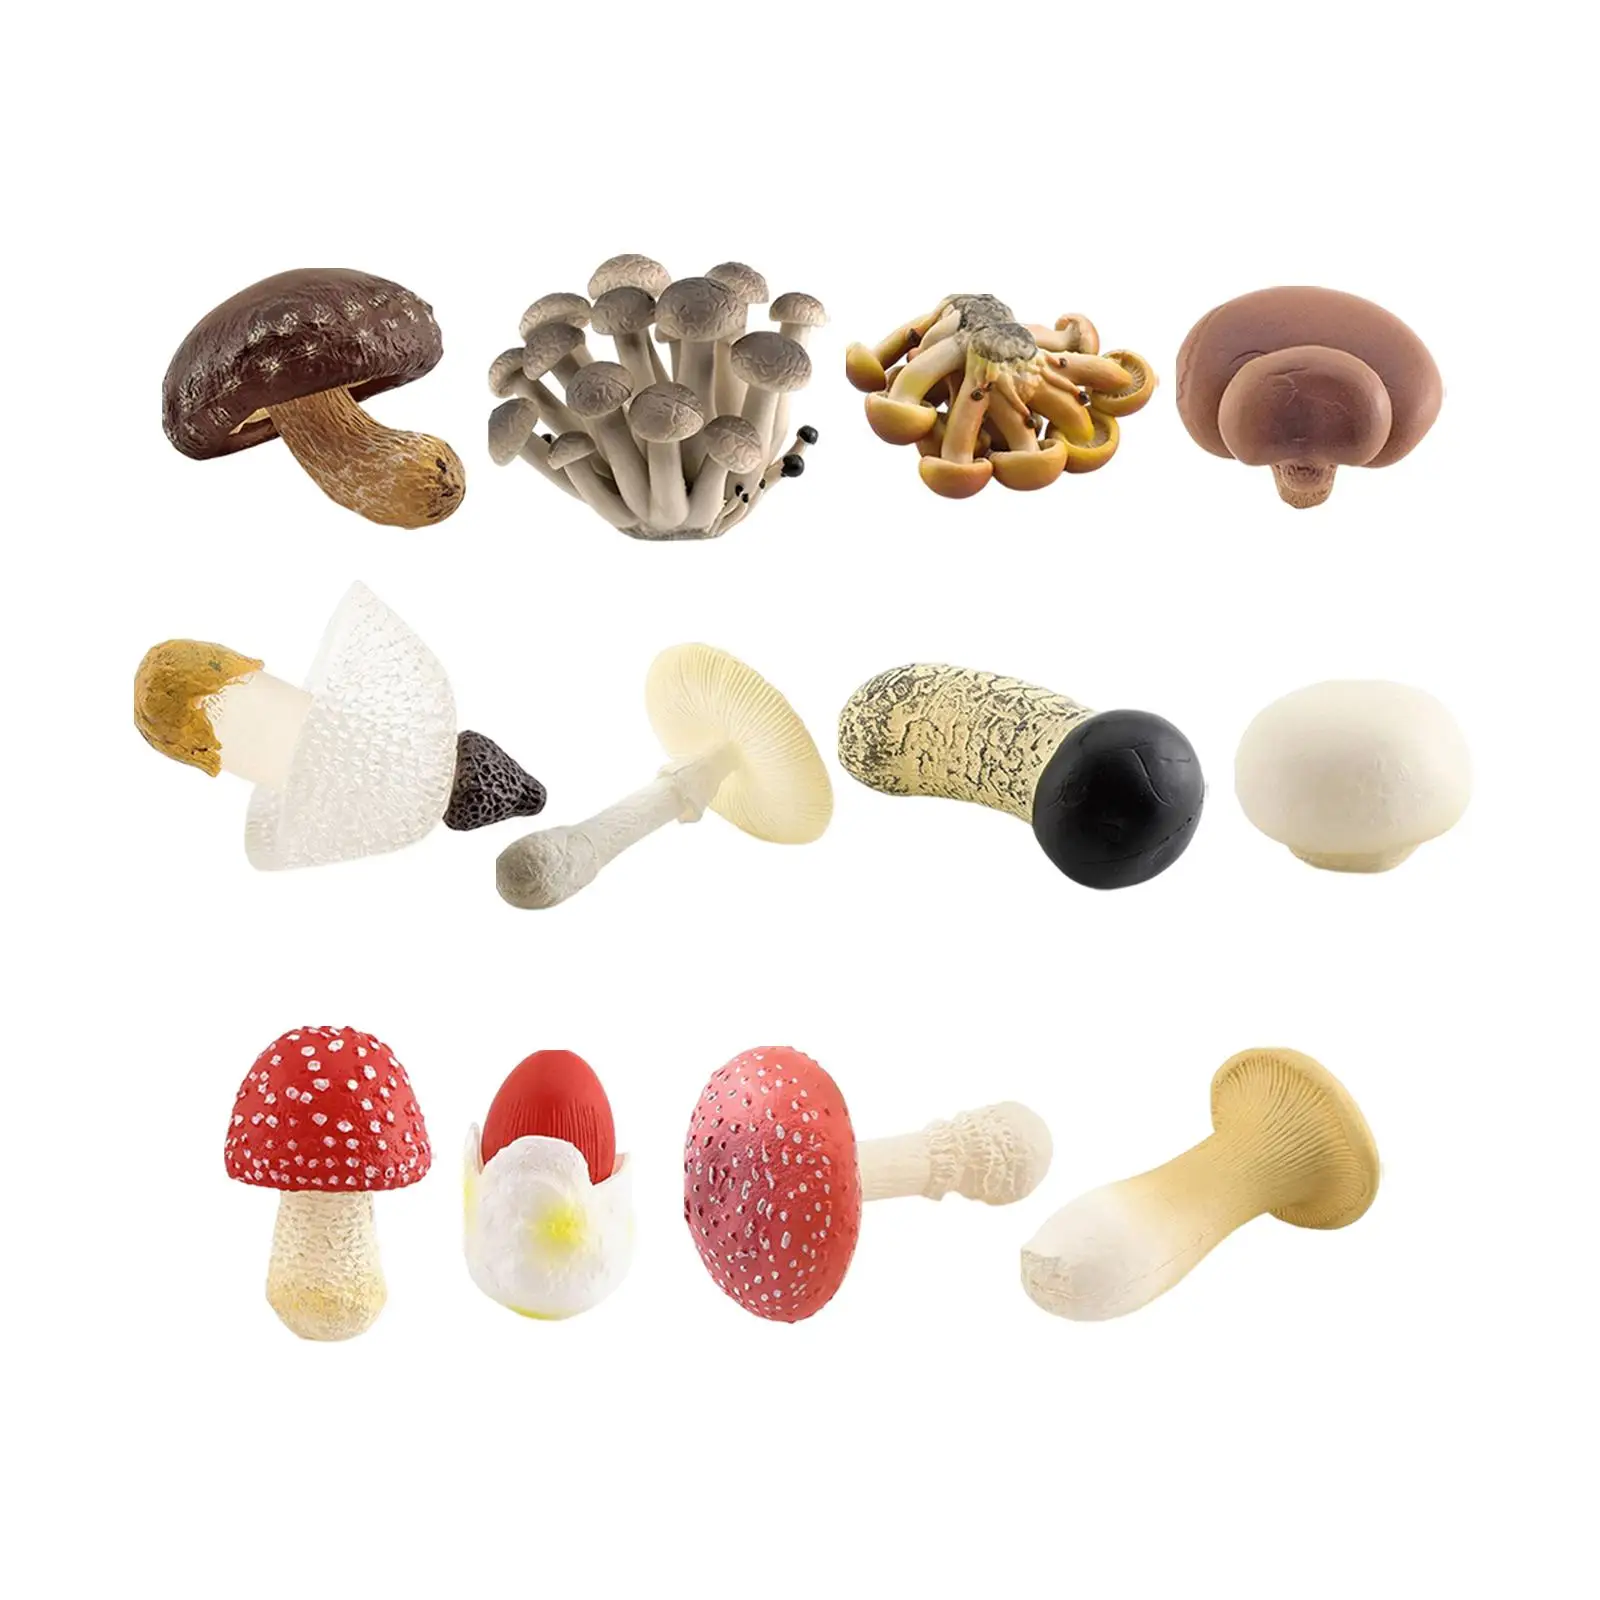 4Pcs Artificial Mushroom Model Props for Scene Layouts Toddlers Girls Boys